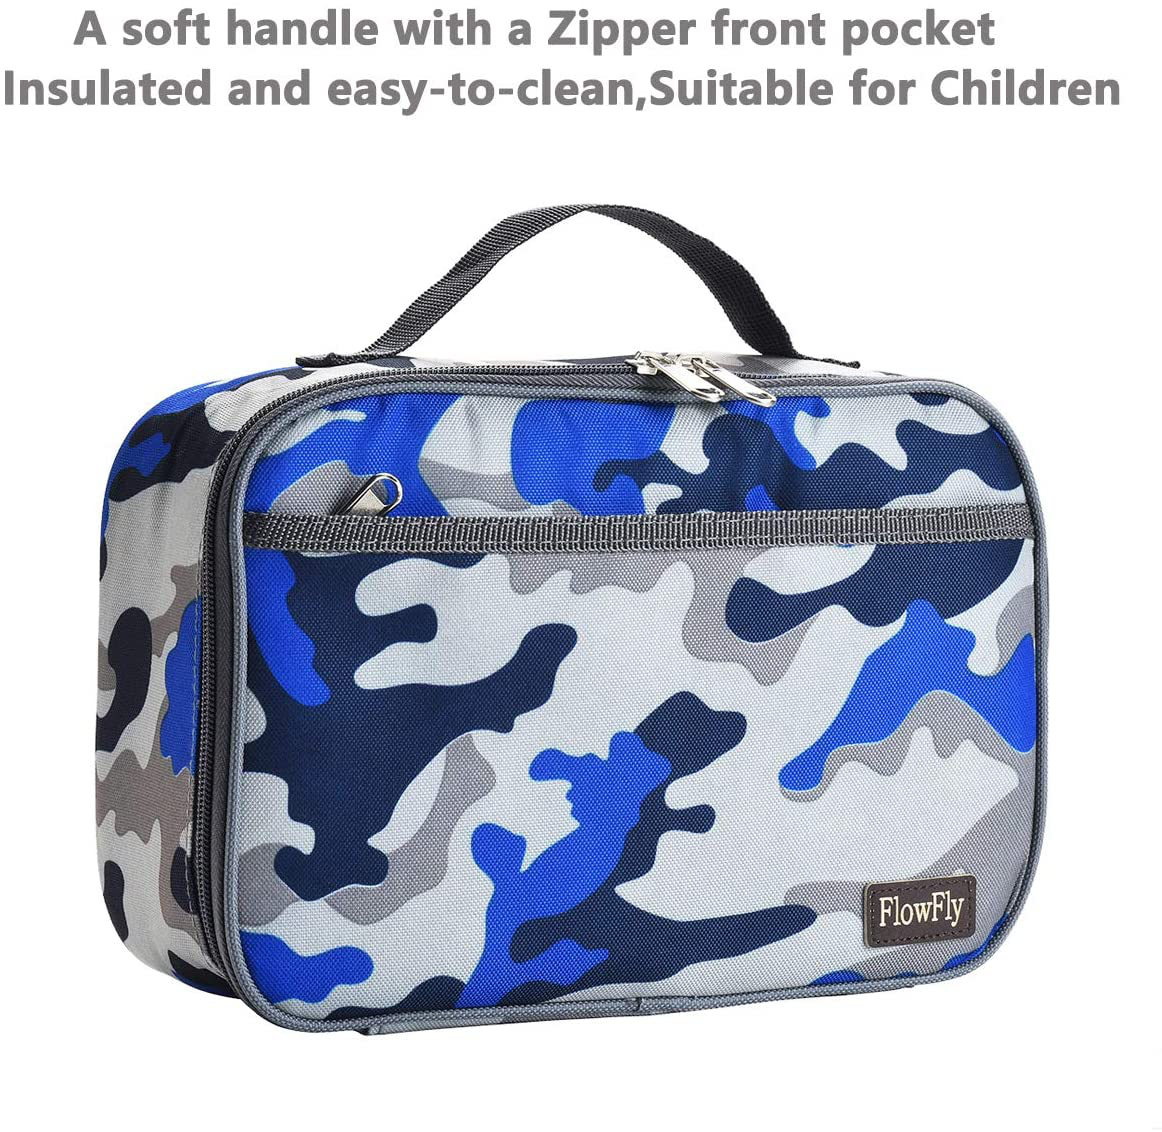 FlowFly Kids Lunch box Insulated Soft Bag Mini Cooler Back to School Thermal Meal Tote Kit for Girls, Boys,Women,Men, Blue Unicorn